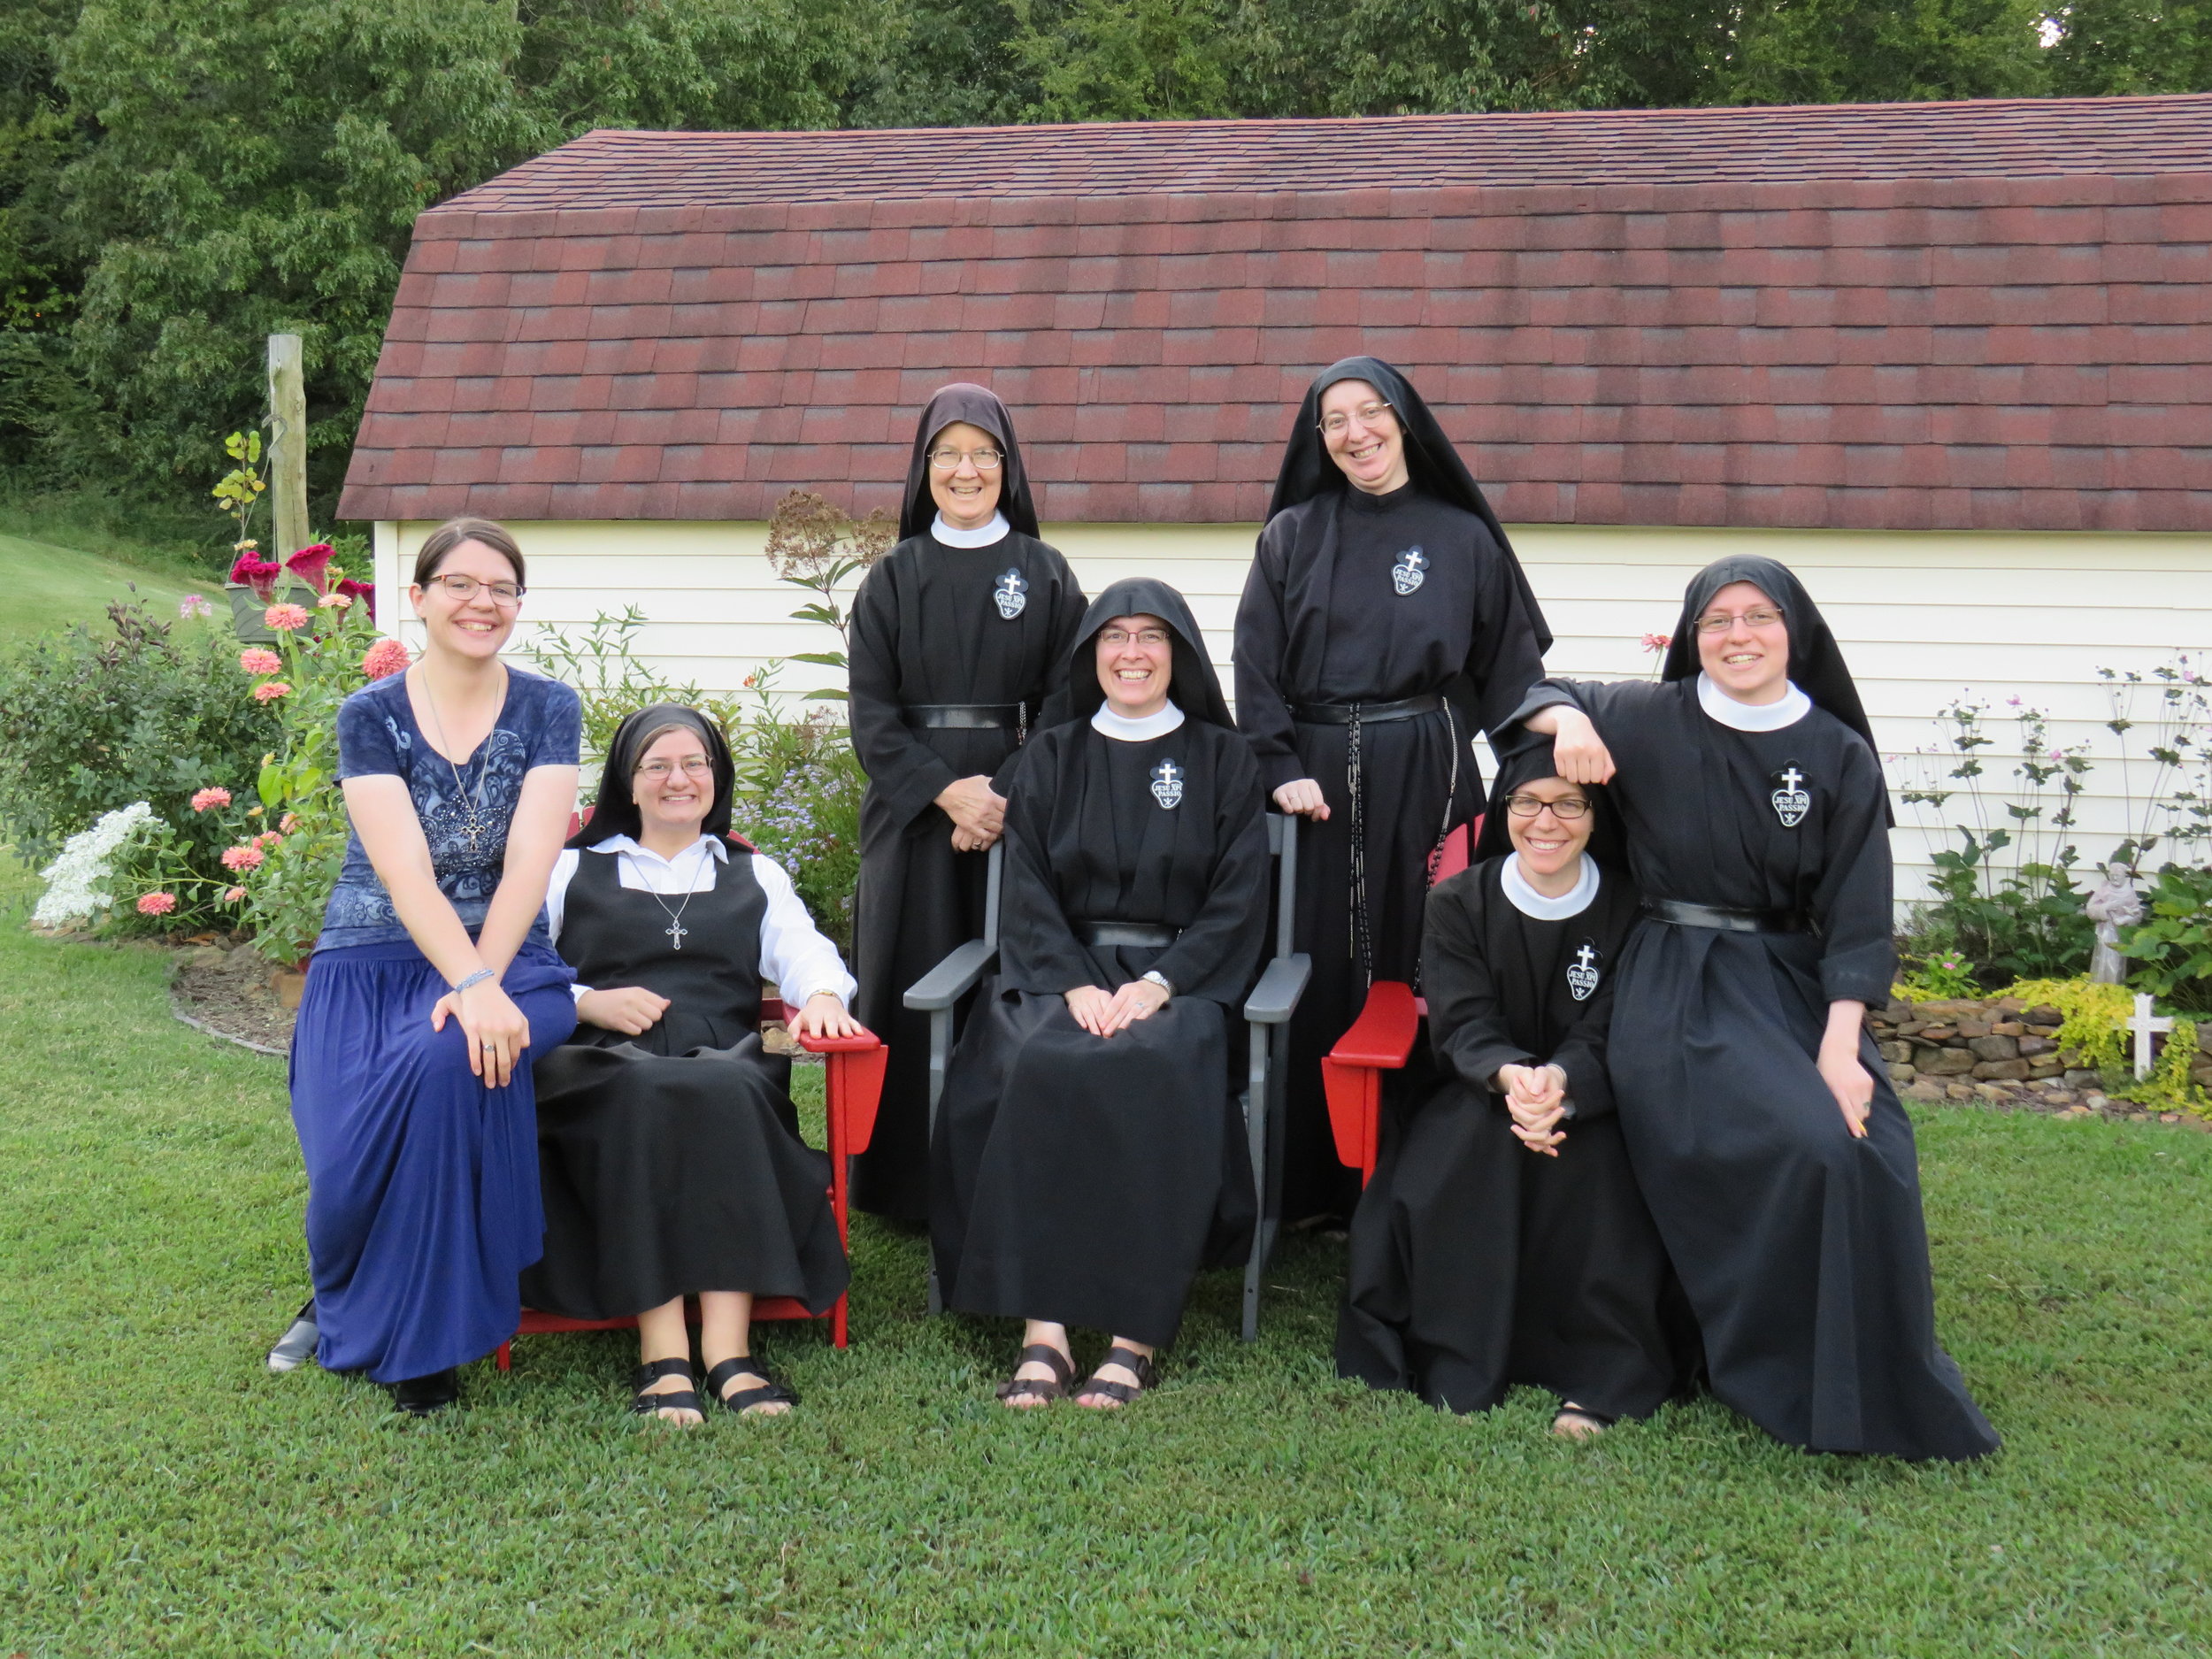  A (mostly) normal photo - aspirant Kathryn, postulant Theresa, Sr. Mary Veronica, Mother John Mary, Sr. Daniela, Sr. Maria Faustina the Long-Suffering Arm Rest, and Sr. Frances Marie. 